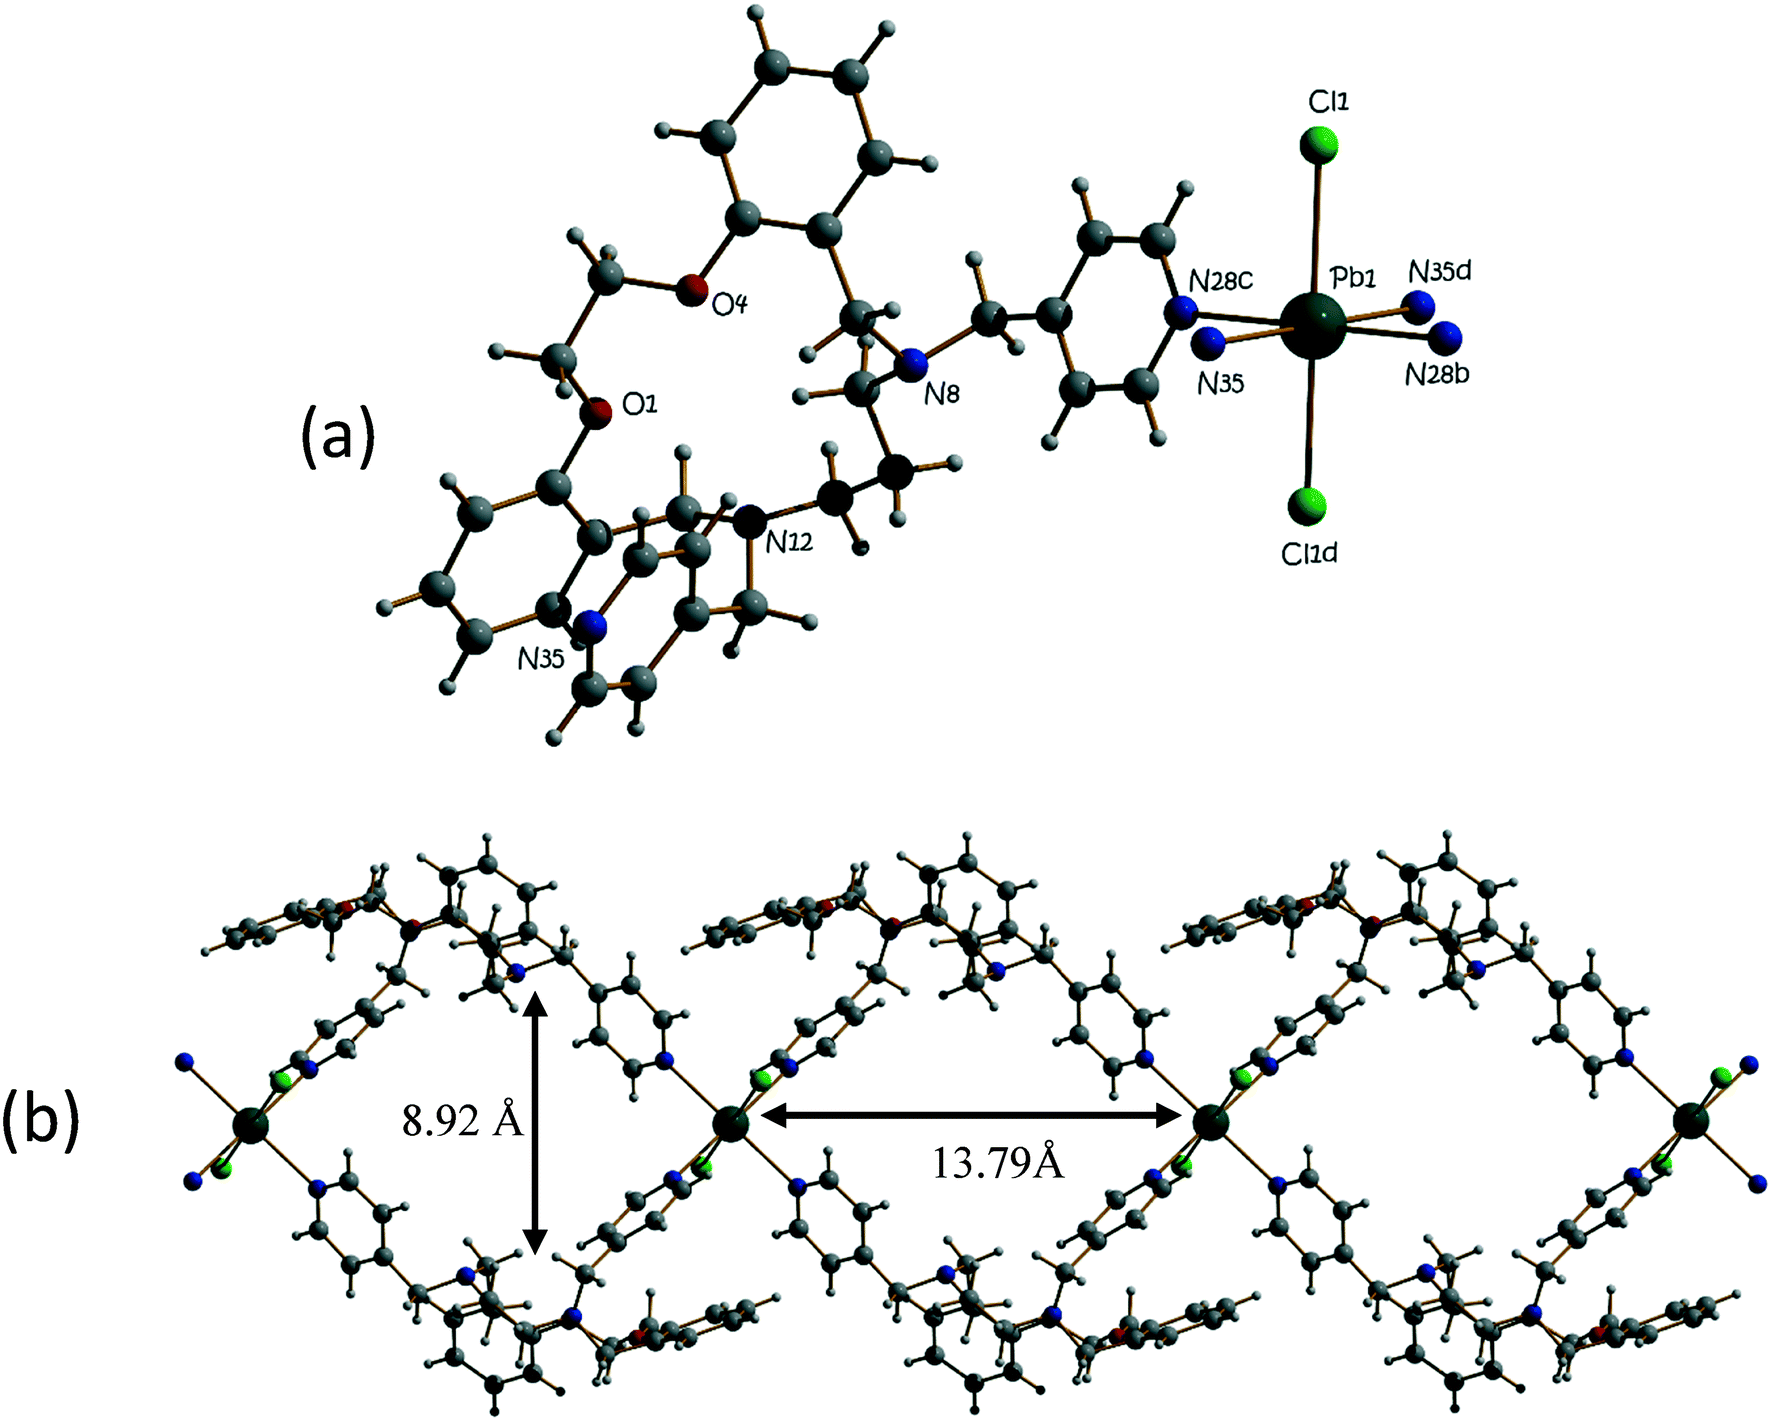 Synthesis X Ray Crystallography Thermogravimetric Analysis And Spectroscopic Characterization Of Isostructural One Dimensional Coordination Polymers As Sorbents For Some Anions Crystengcomm Rsc Publishing